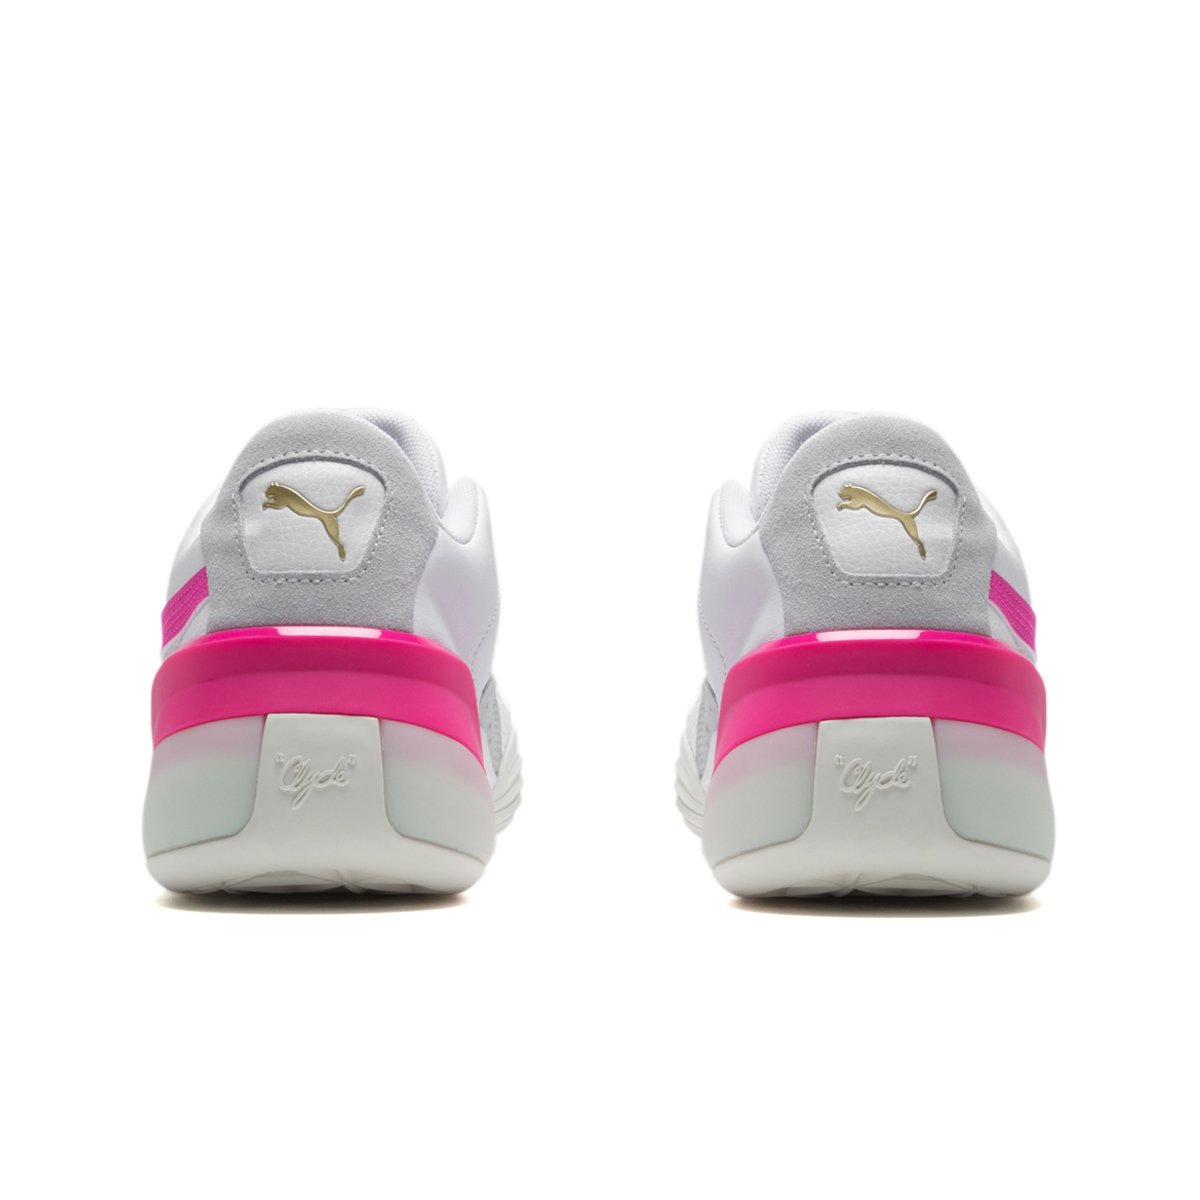 puma white and pink shoes